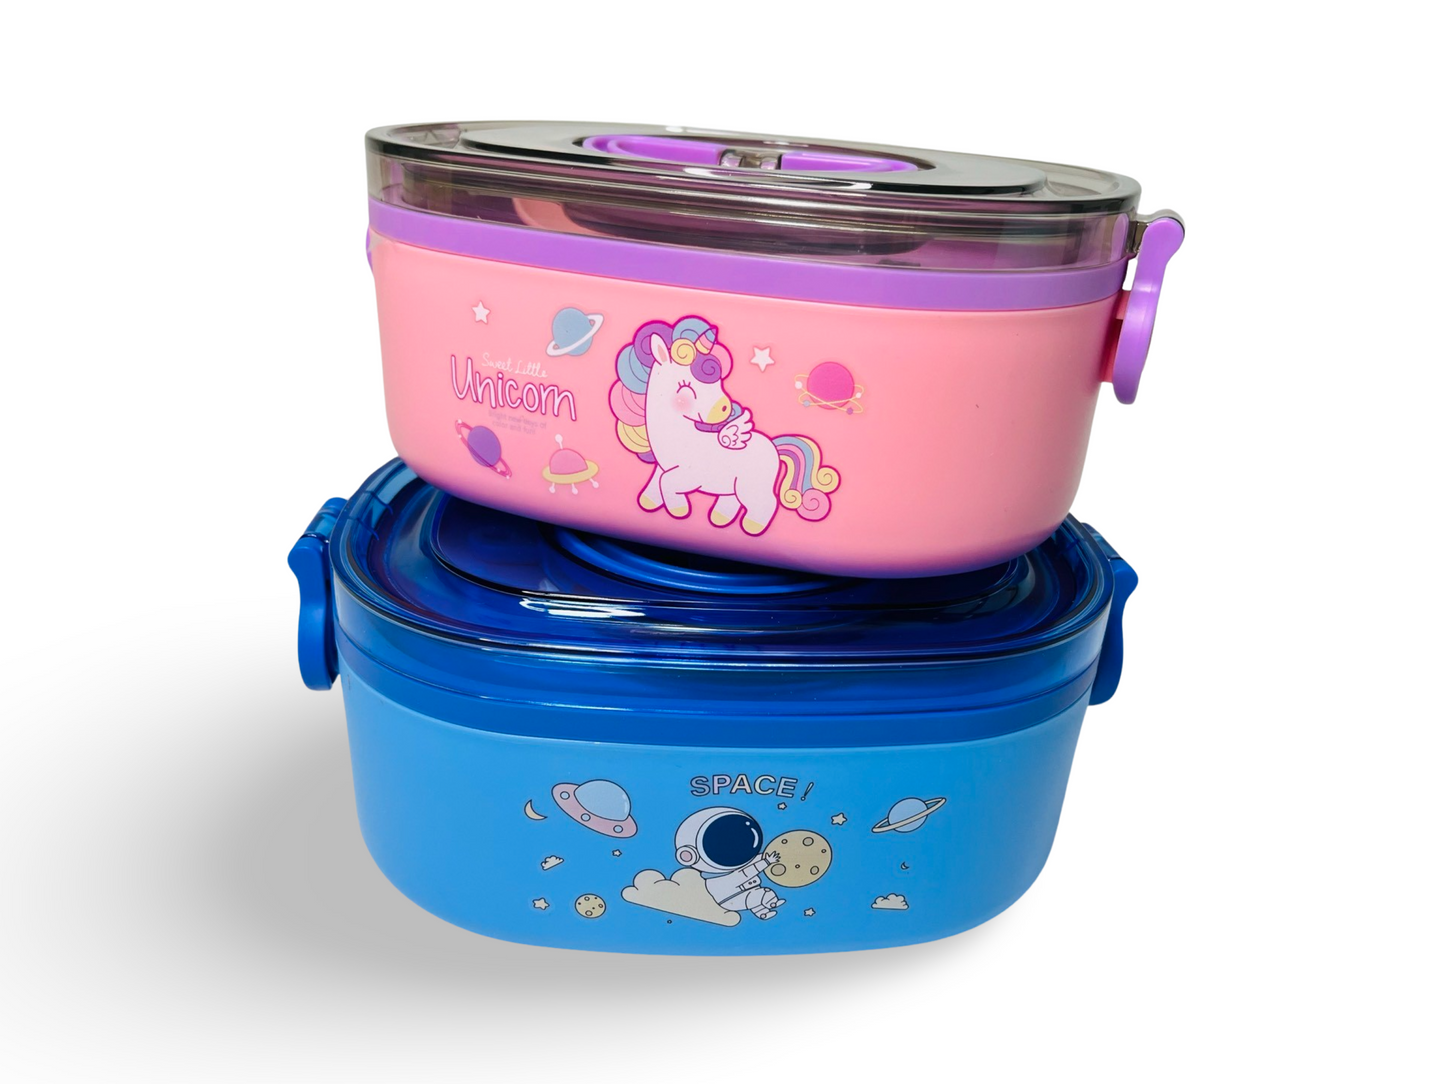 Cute Unicorn & Space Theme Lunch Box for kids